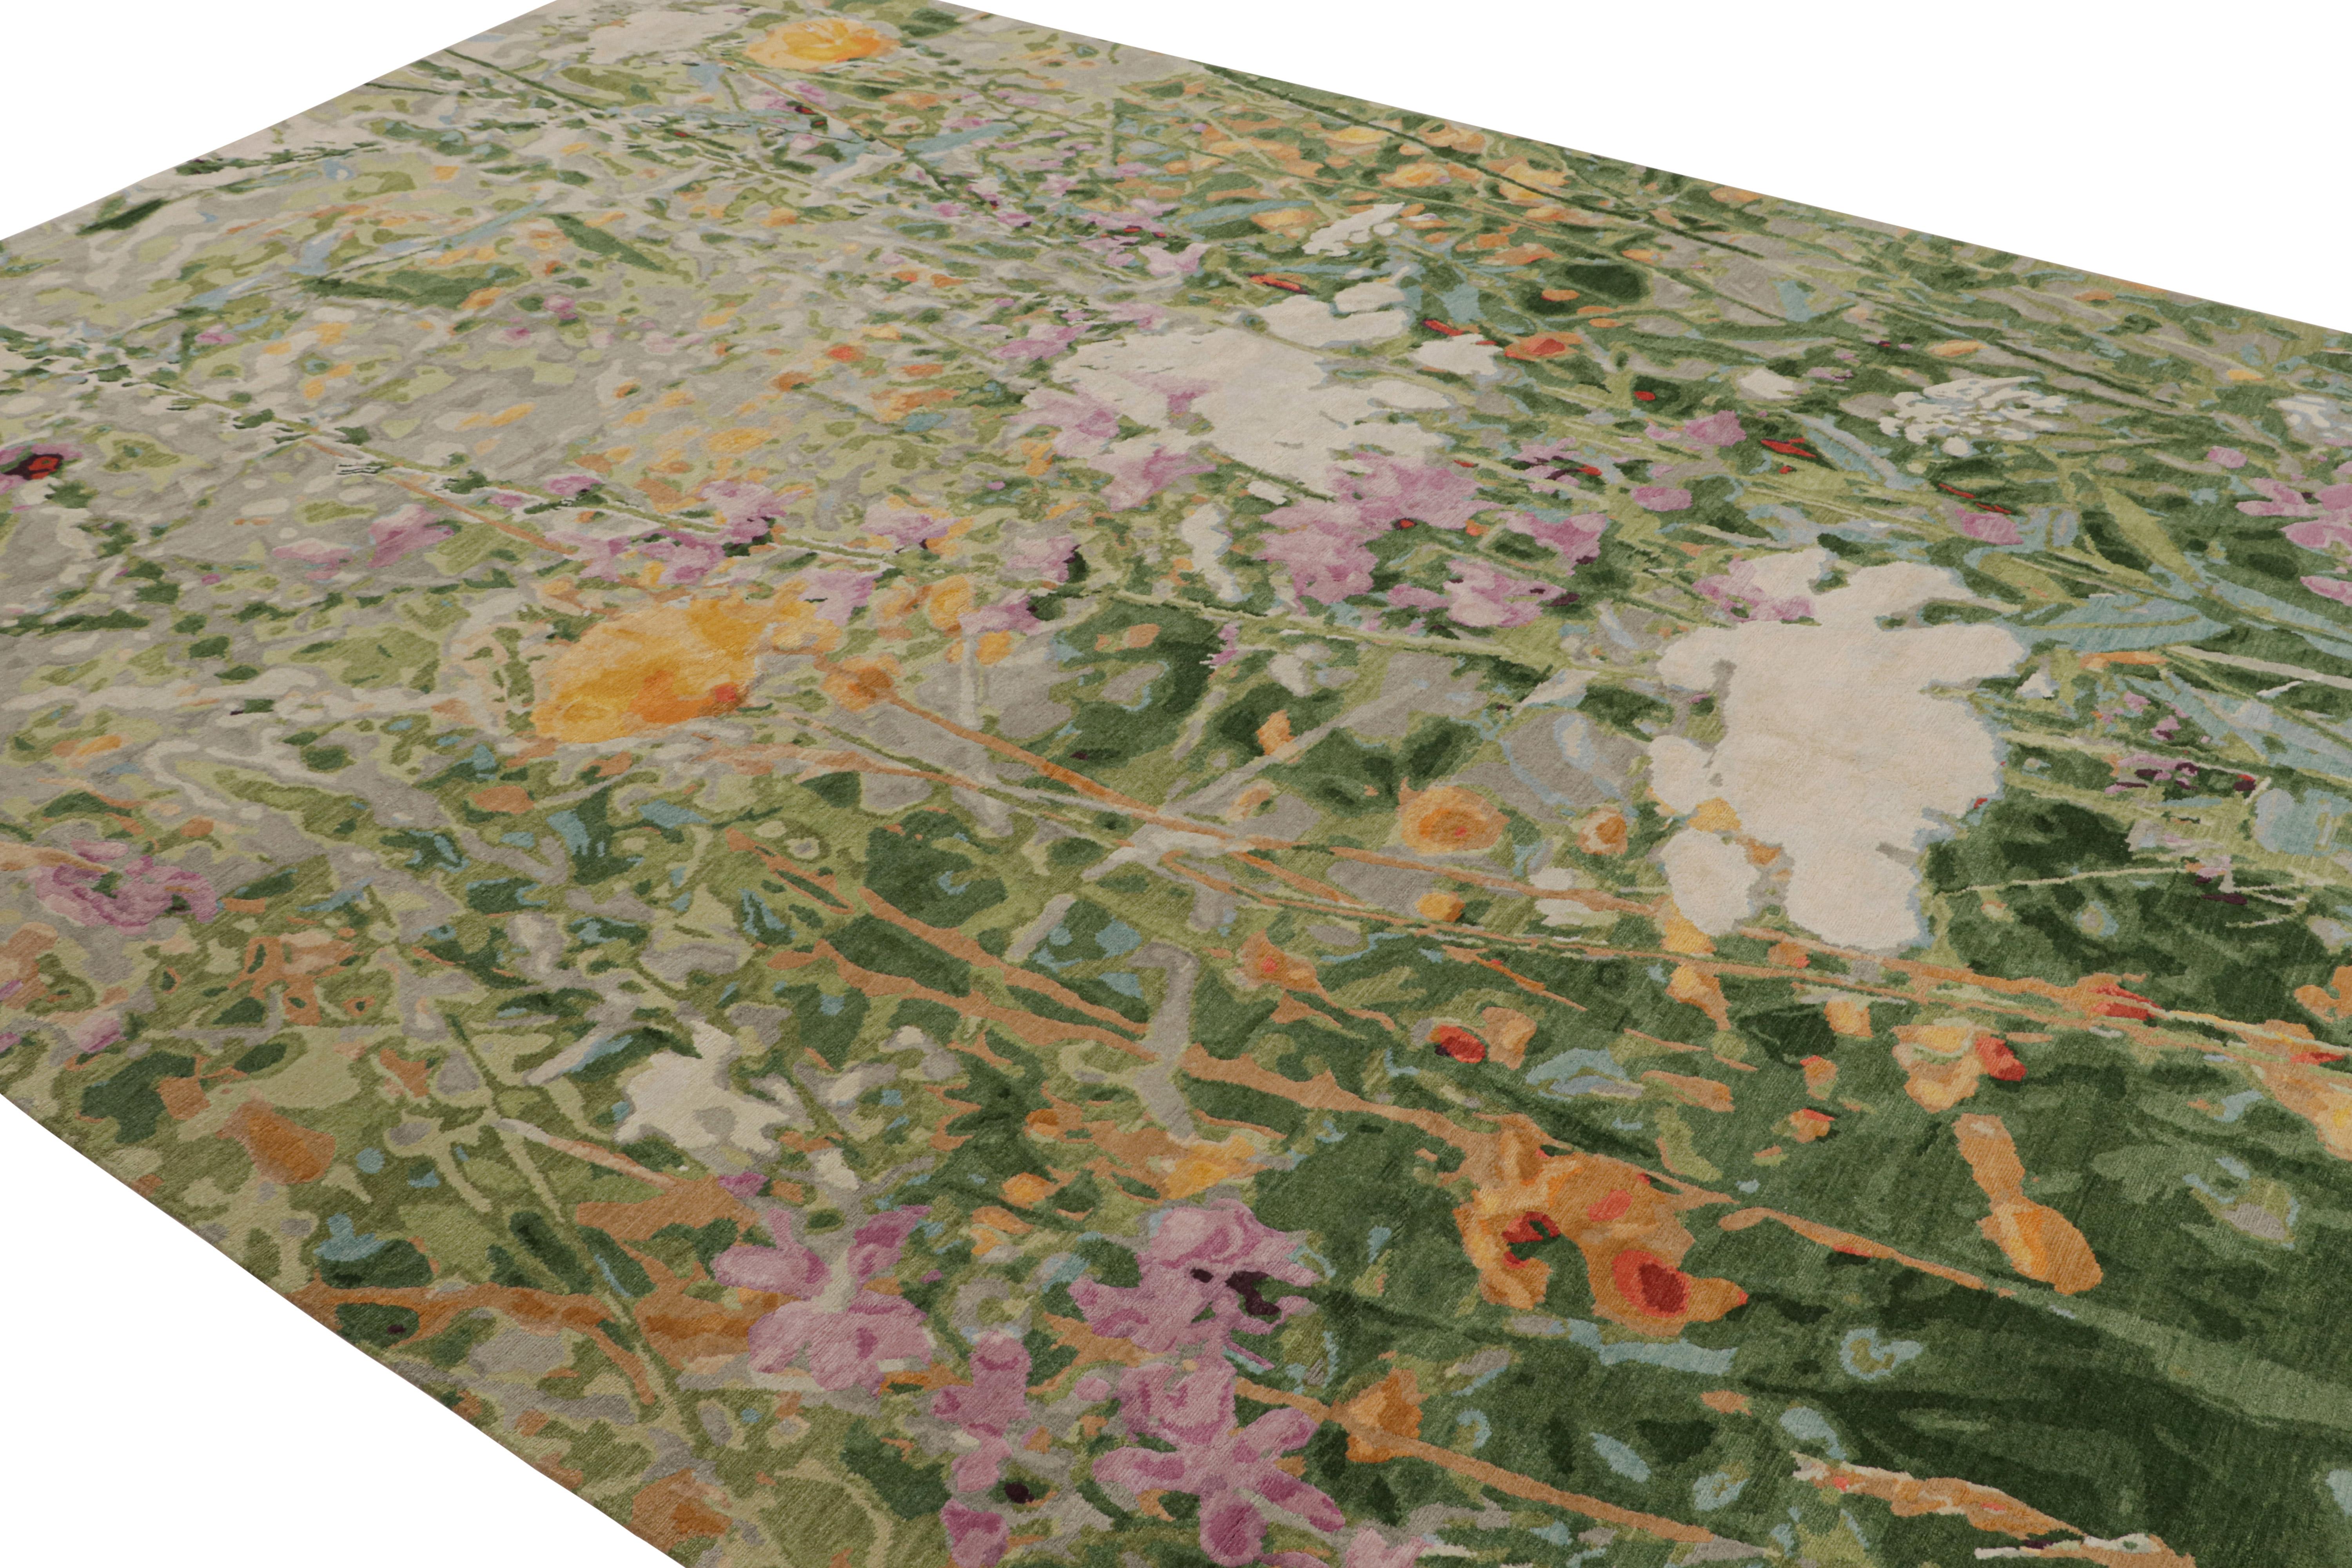 Hand-knotted in wool and silk, this 9x12 modern abstract rug features “Wild Flowers Spring” design draws inspiration from a lively botanical design and is executed like a dreamy watercolor or even Jackson Pollock-esque painting. 

On the Design:

